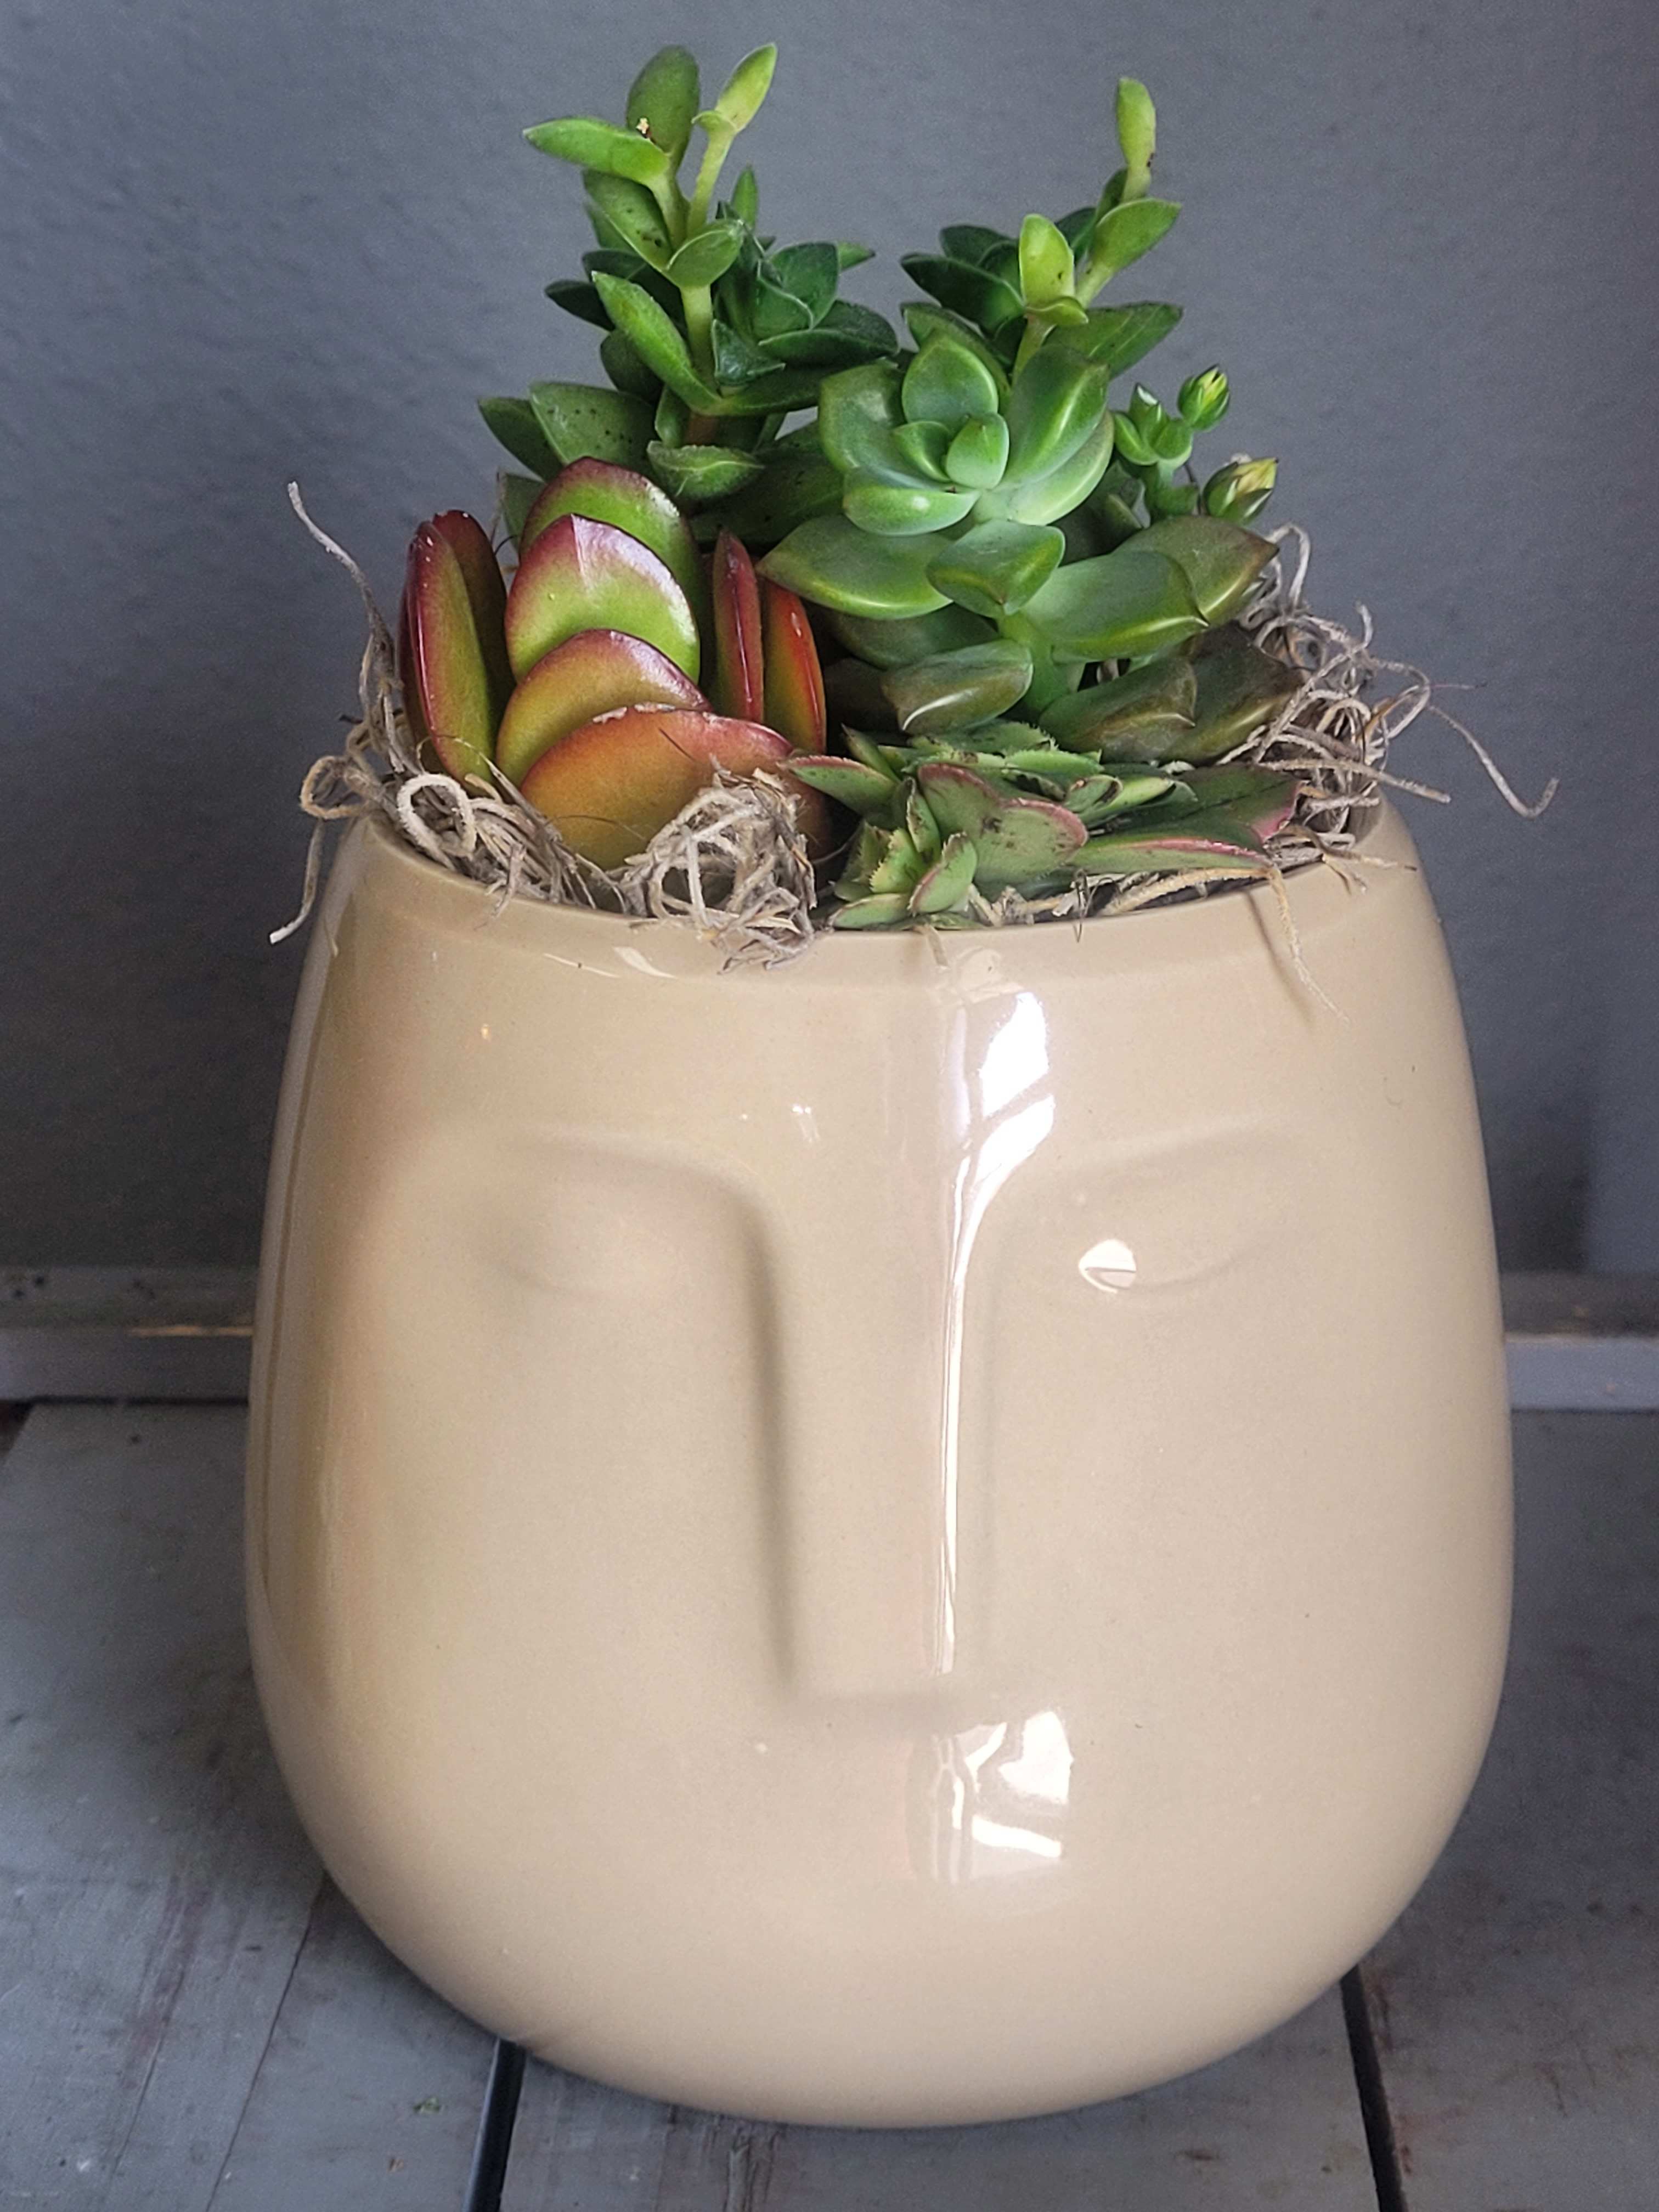 Awesome Face - This ceramic face is planted with hardy succulents and would be ideal on a porch, patio or garden. It has a drainage hole too.